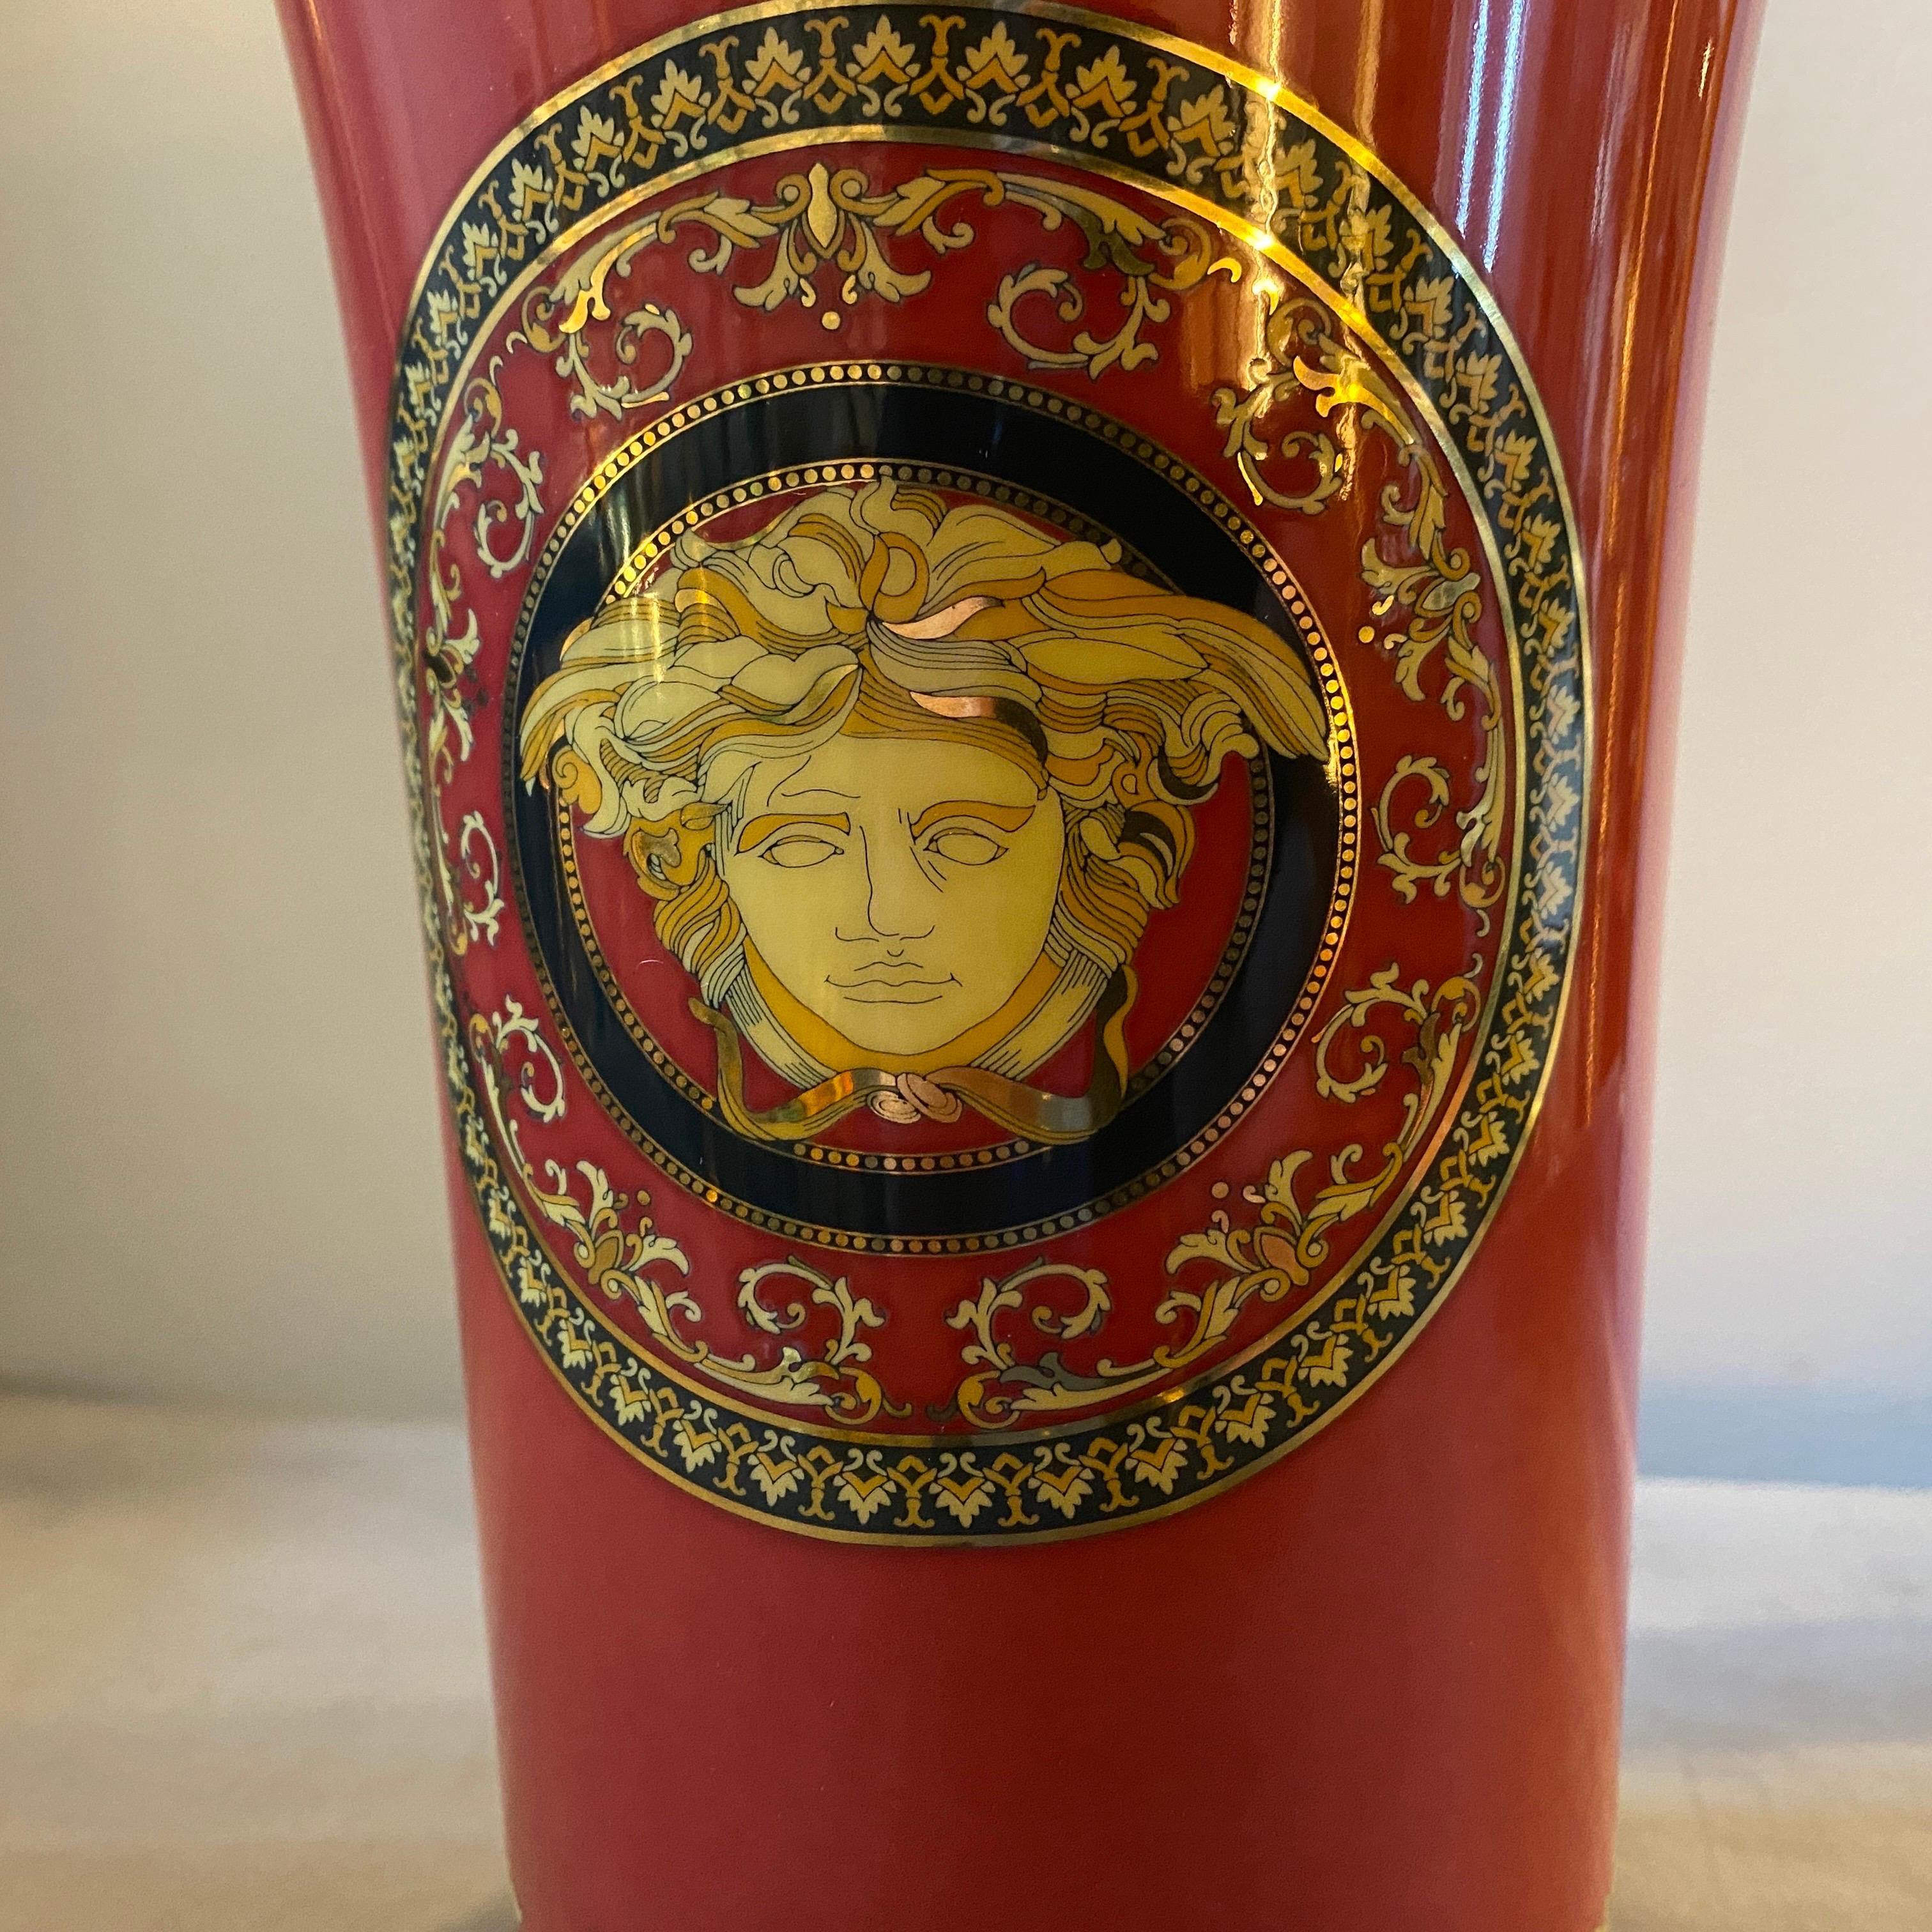 Neoclassical Revival 1990s, Iconic Porcelain Medusa Vase Designed by Gianni Versace for Rosenthal For Sale